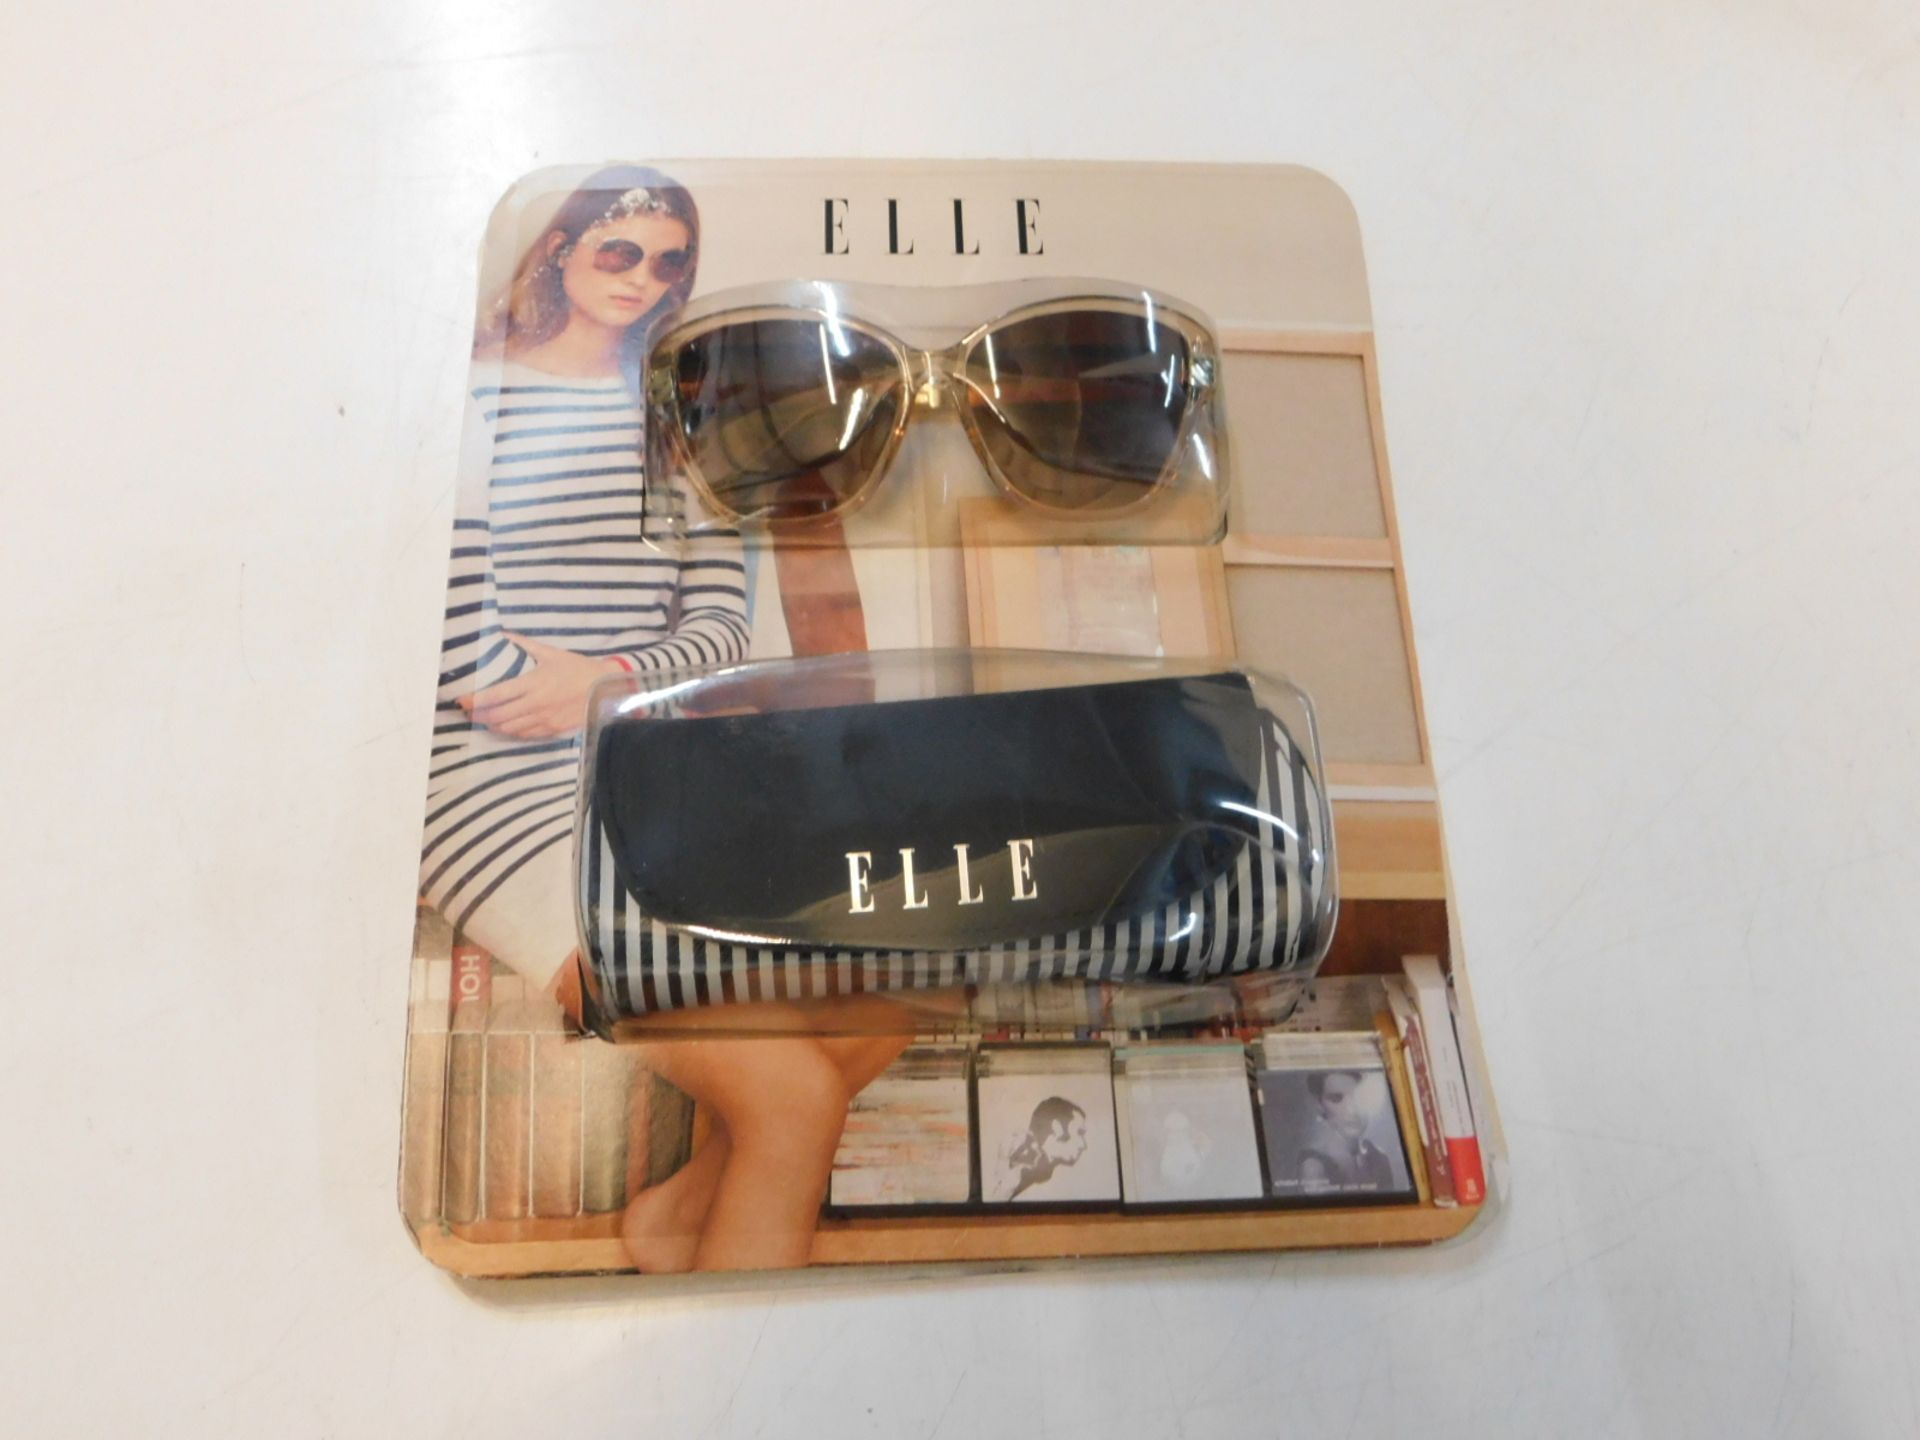 1 PACK OF ELLE WOMENS SUNGLASSESS WITH CASE RRP £69.99